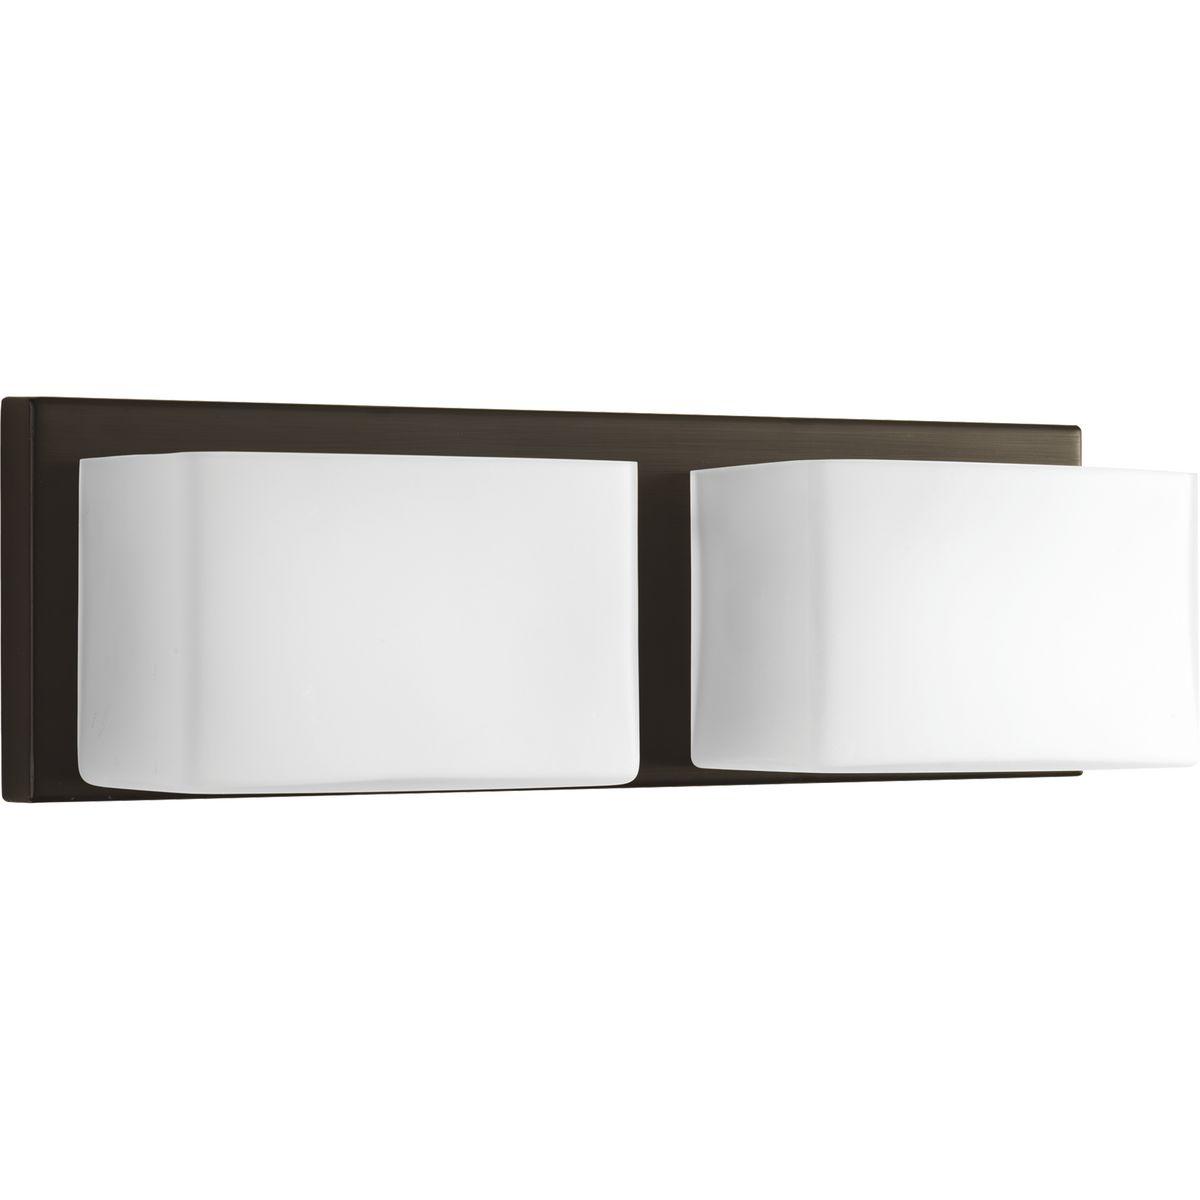 Hubbell P2143-2030K9 Two-Light LED modern wall fixture in Antique Bronze with geometric frosted glass shades and a replaceable LED module. This modern fixture is perfect for the bathroom. 3000K color temperature and 90 plus CRI.  ; Ideal for a bathroom and powder room. ; Perf